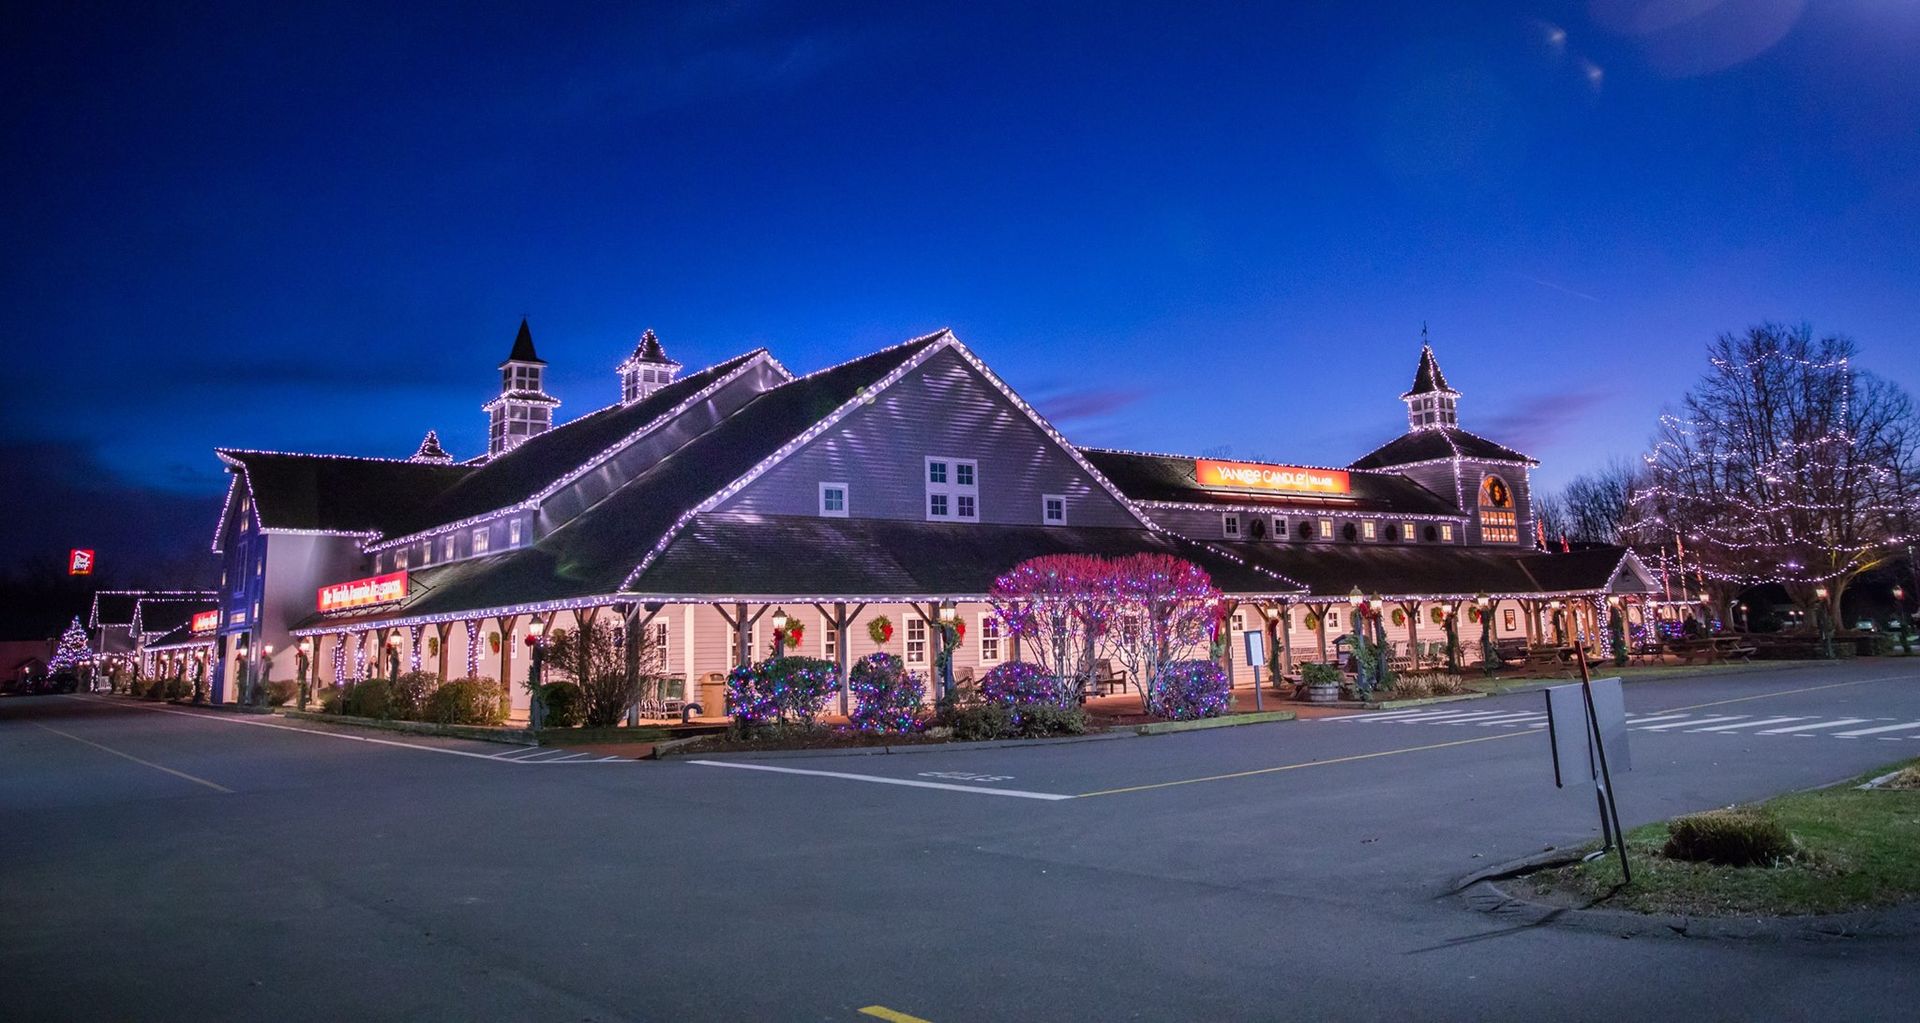 World’s Largest Candle Store, world record in South Deerfield, Massachusetts